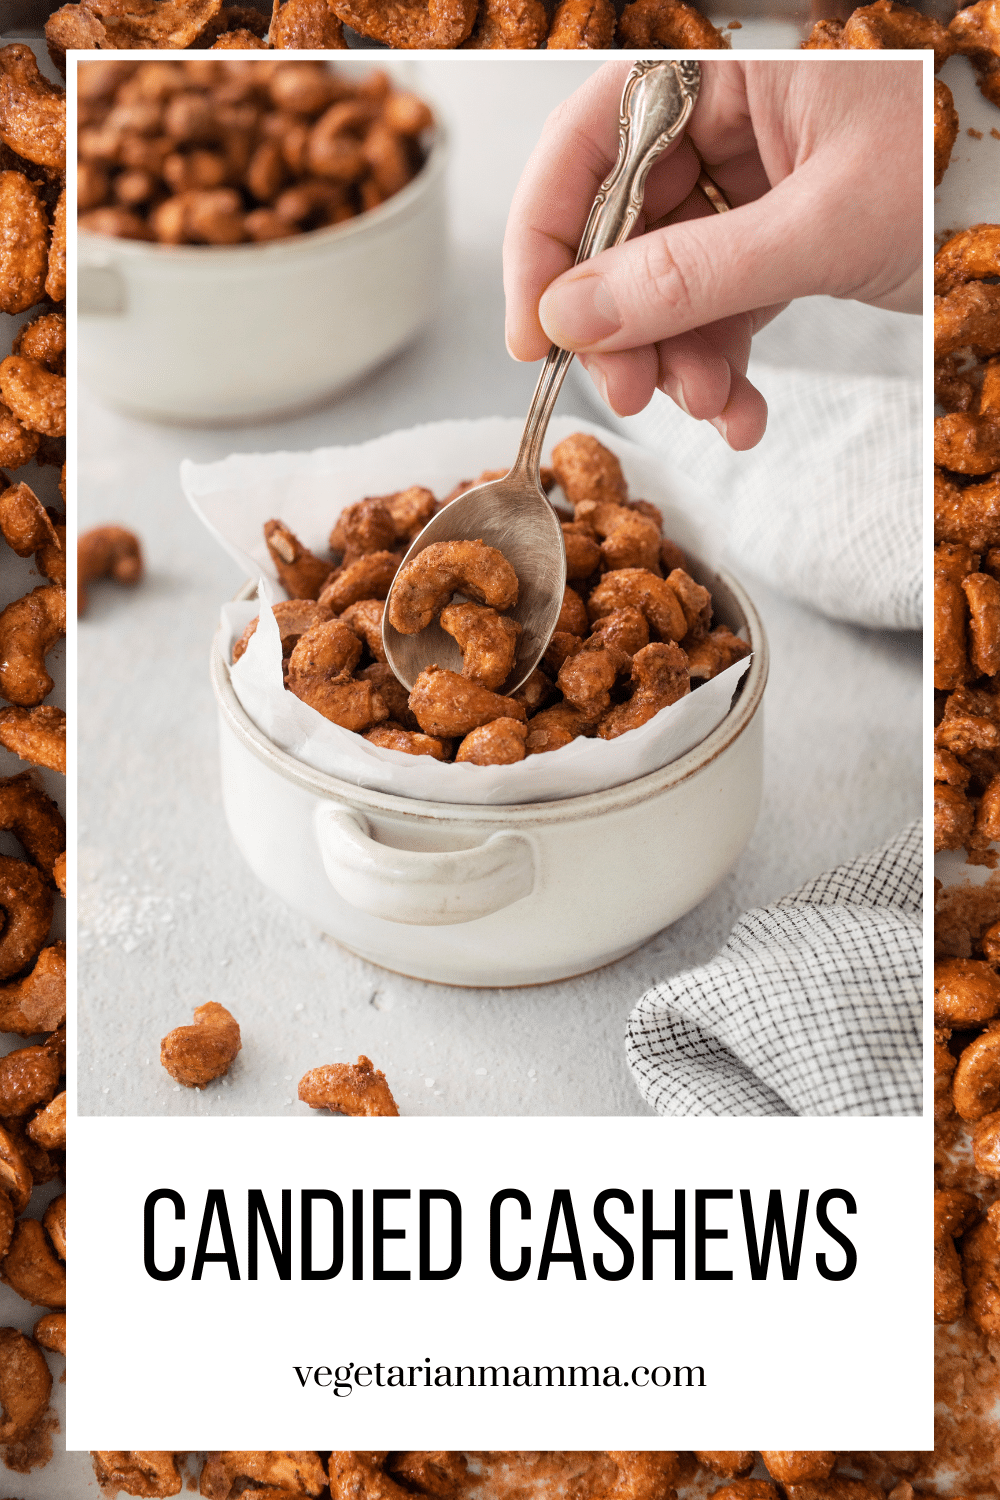 Homemade Candied Cashews are so simple to make, and completely delicious in so many ways! These nuts are crisp and crunchy, perfectly sweetened, and flavored with cinnamon, nutmeg, and maple syrup.